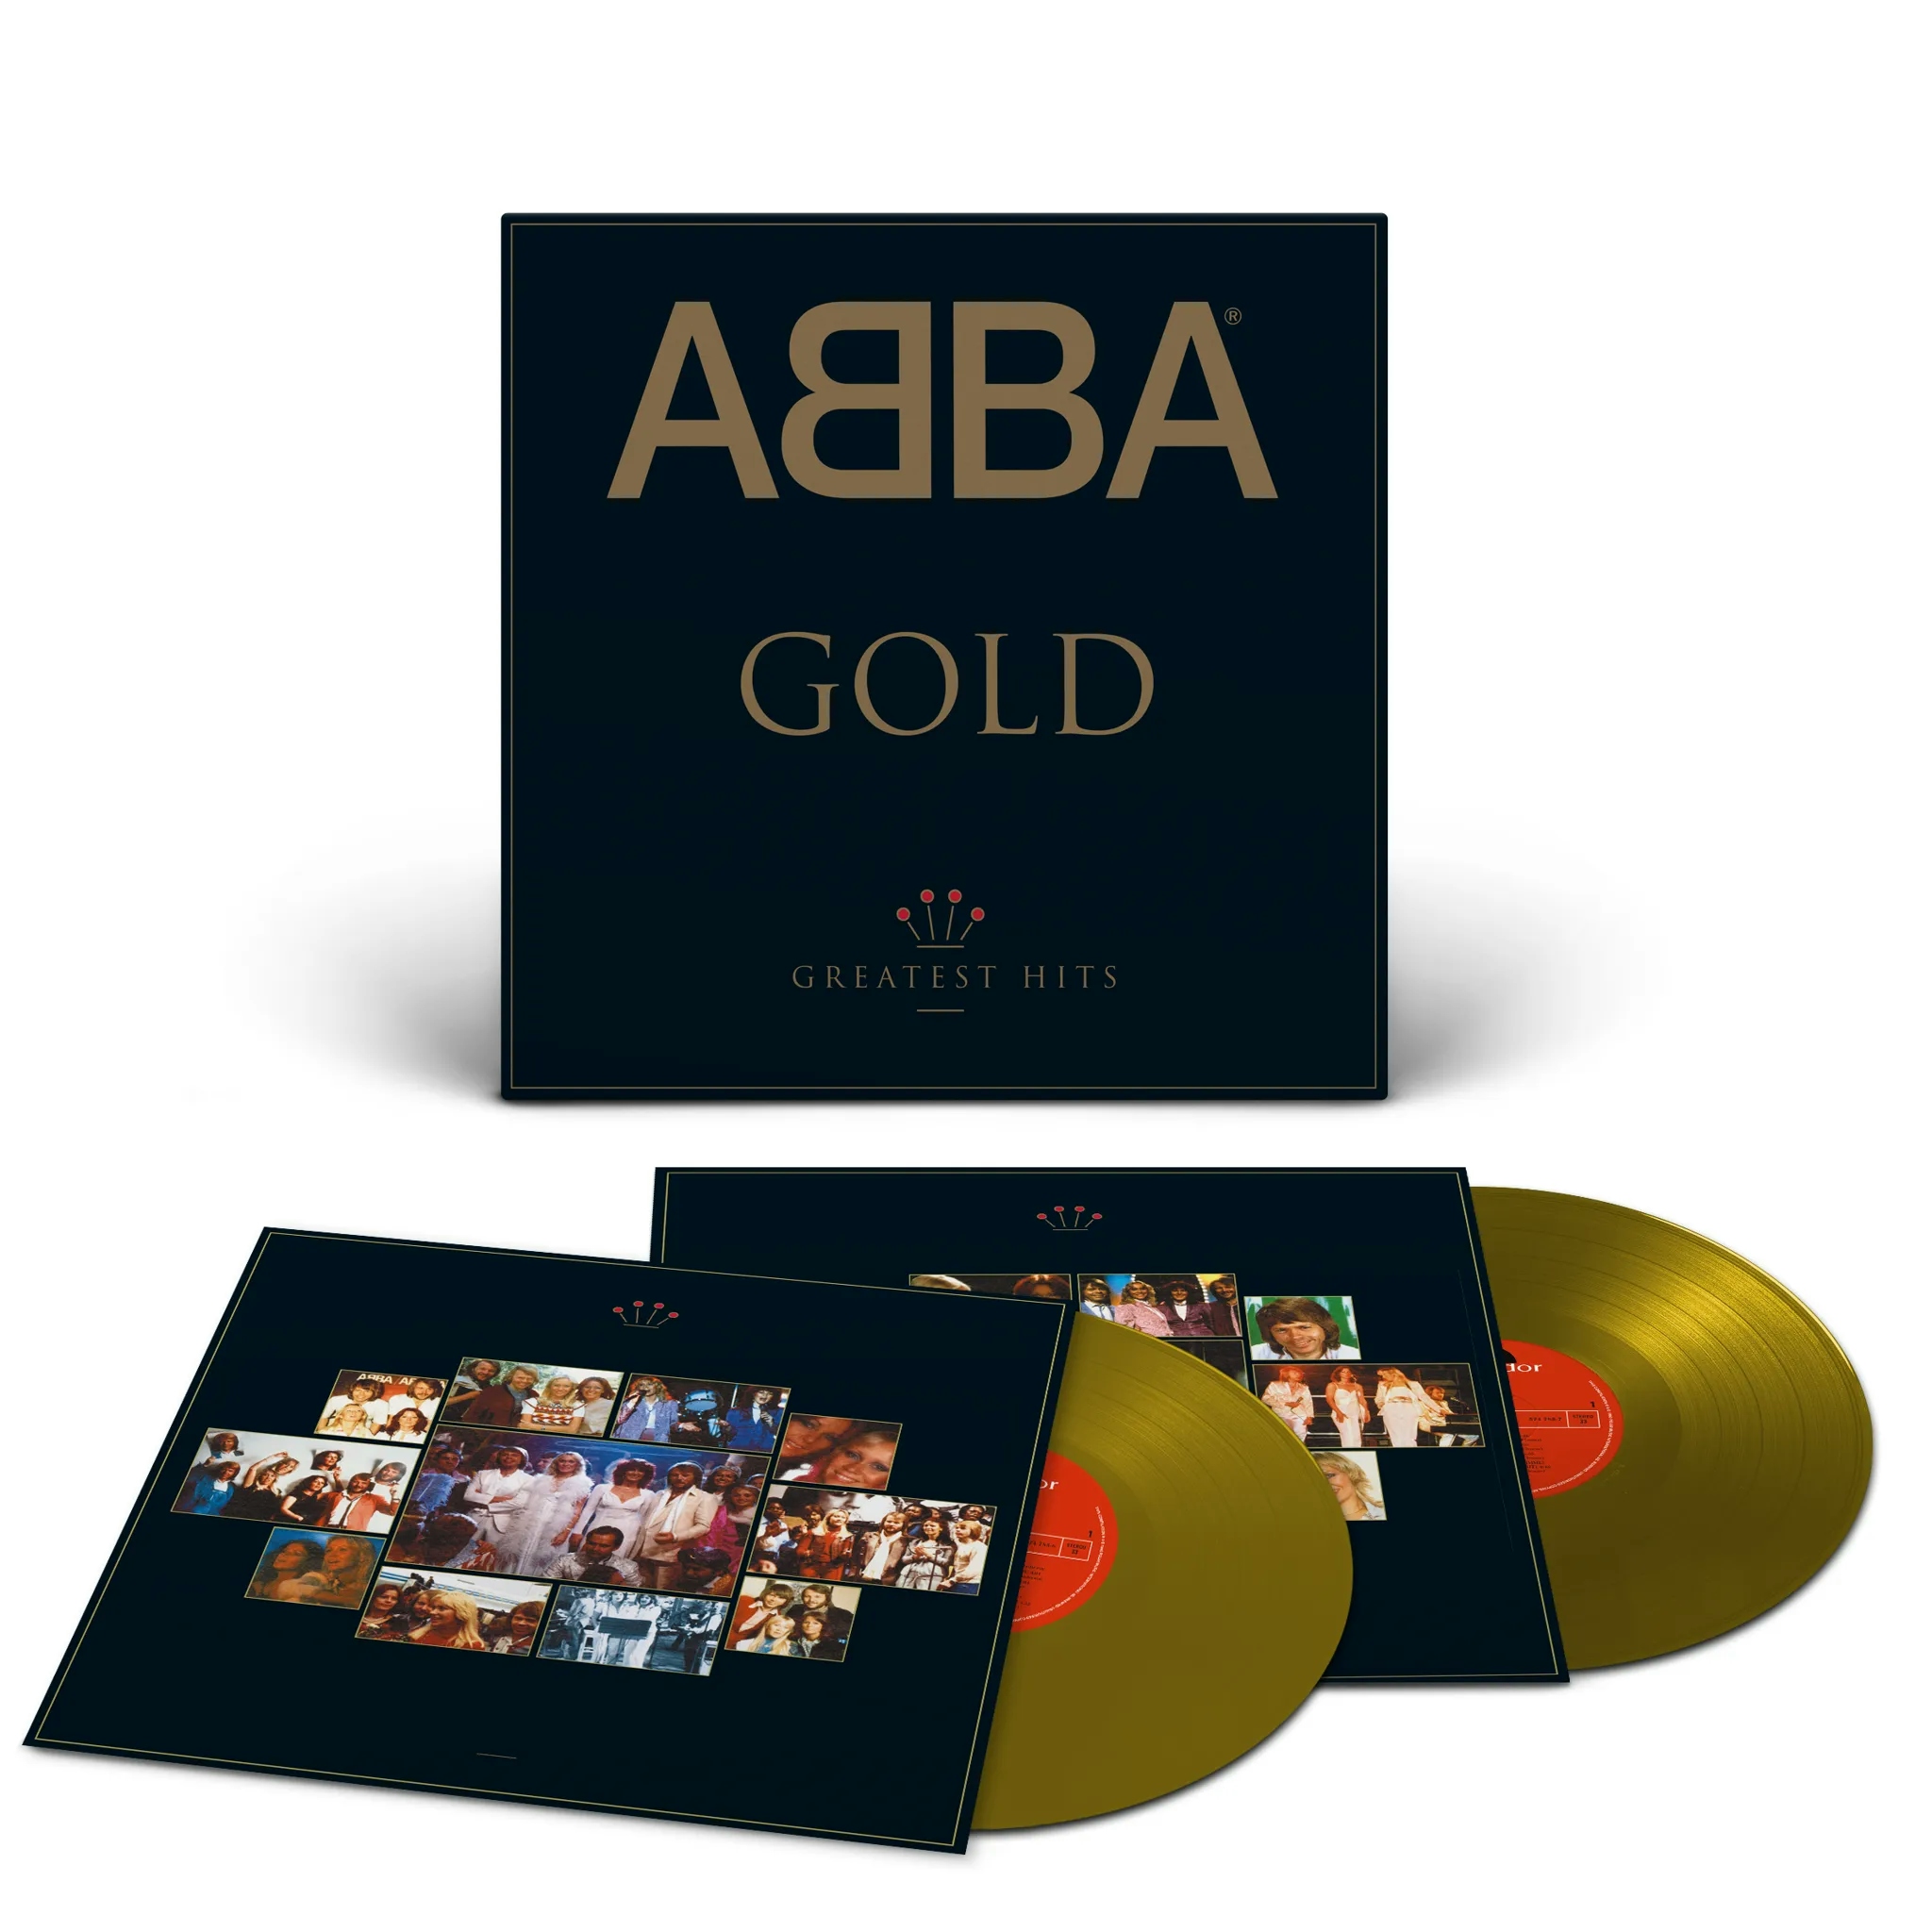 Album artwork for Gold - Greatest Hits by ABBA